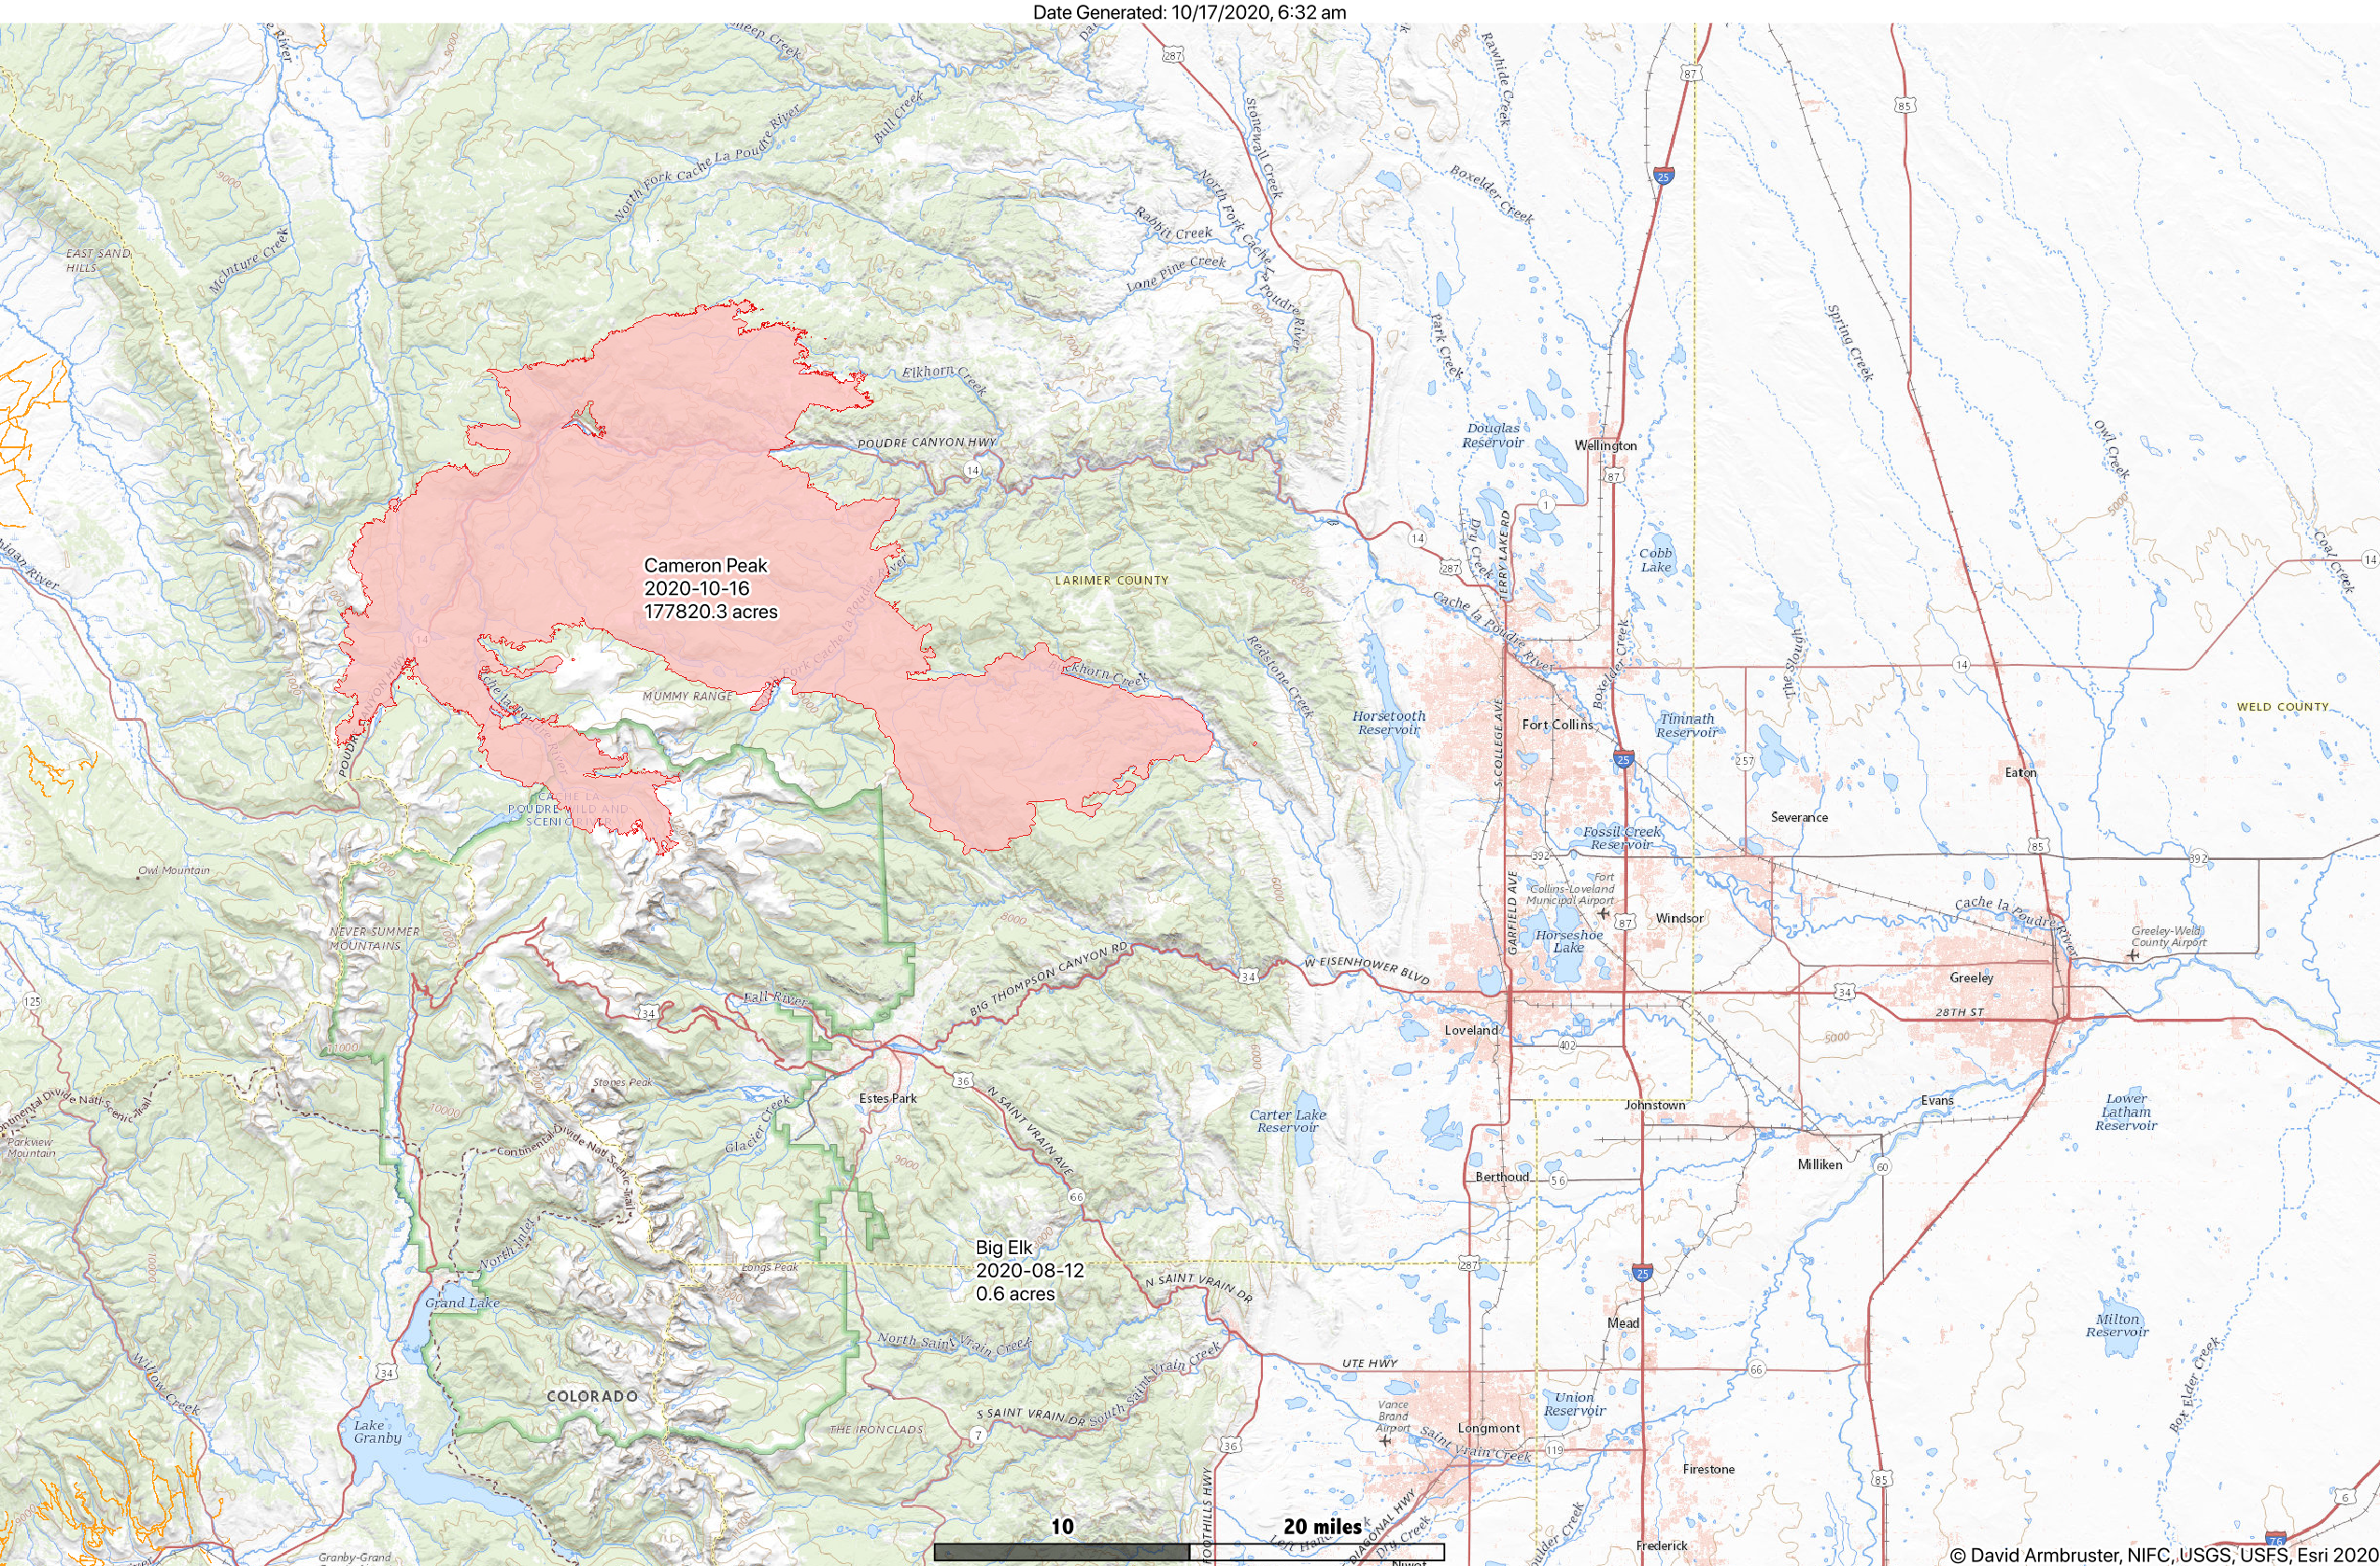 cameronpeakfire-oct172020_02.png